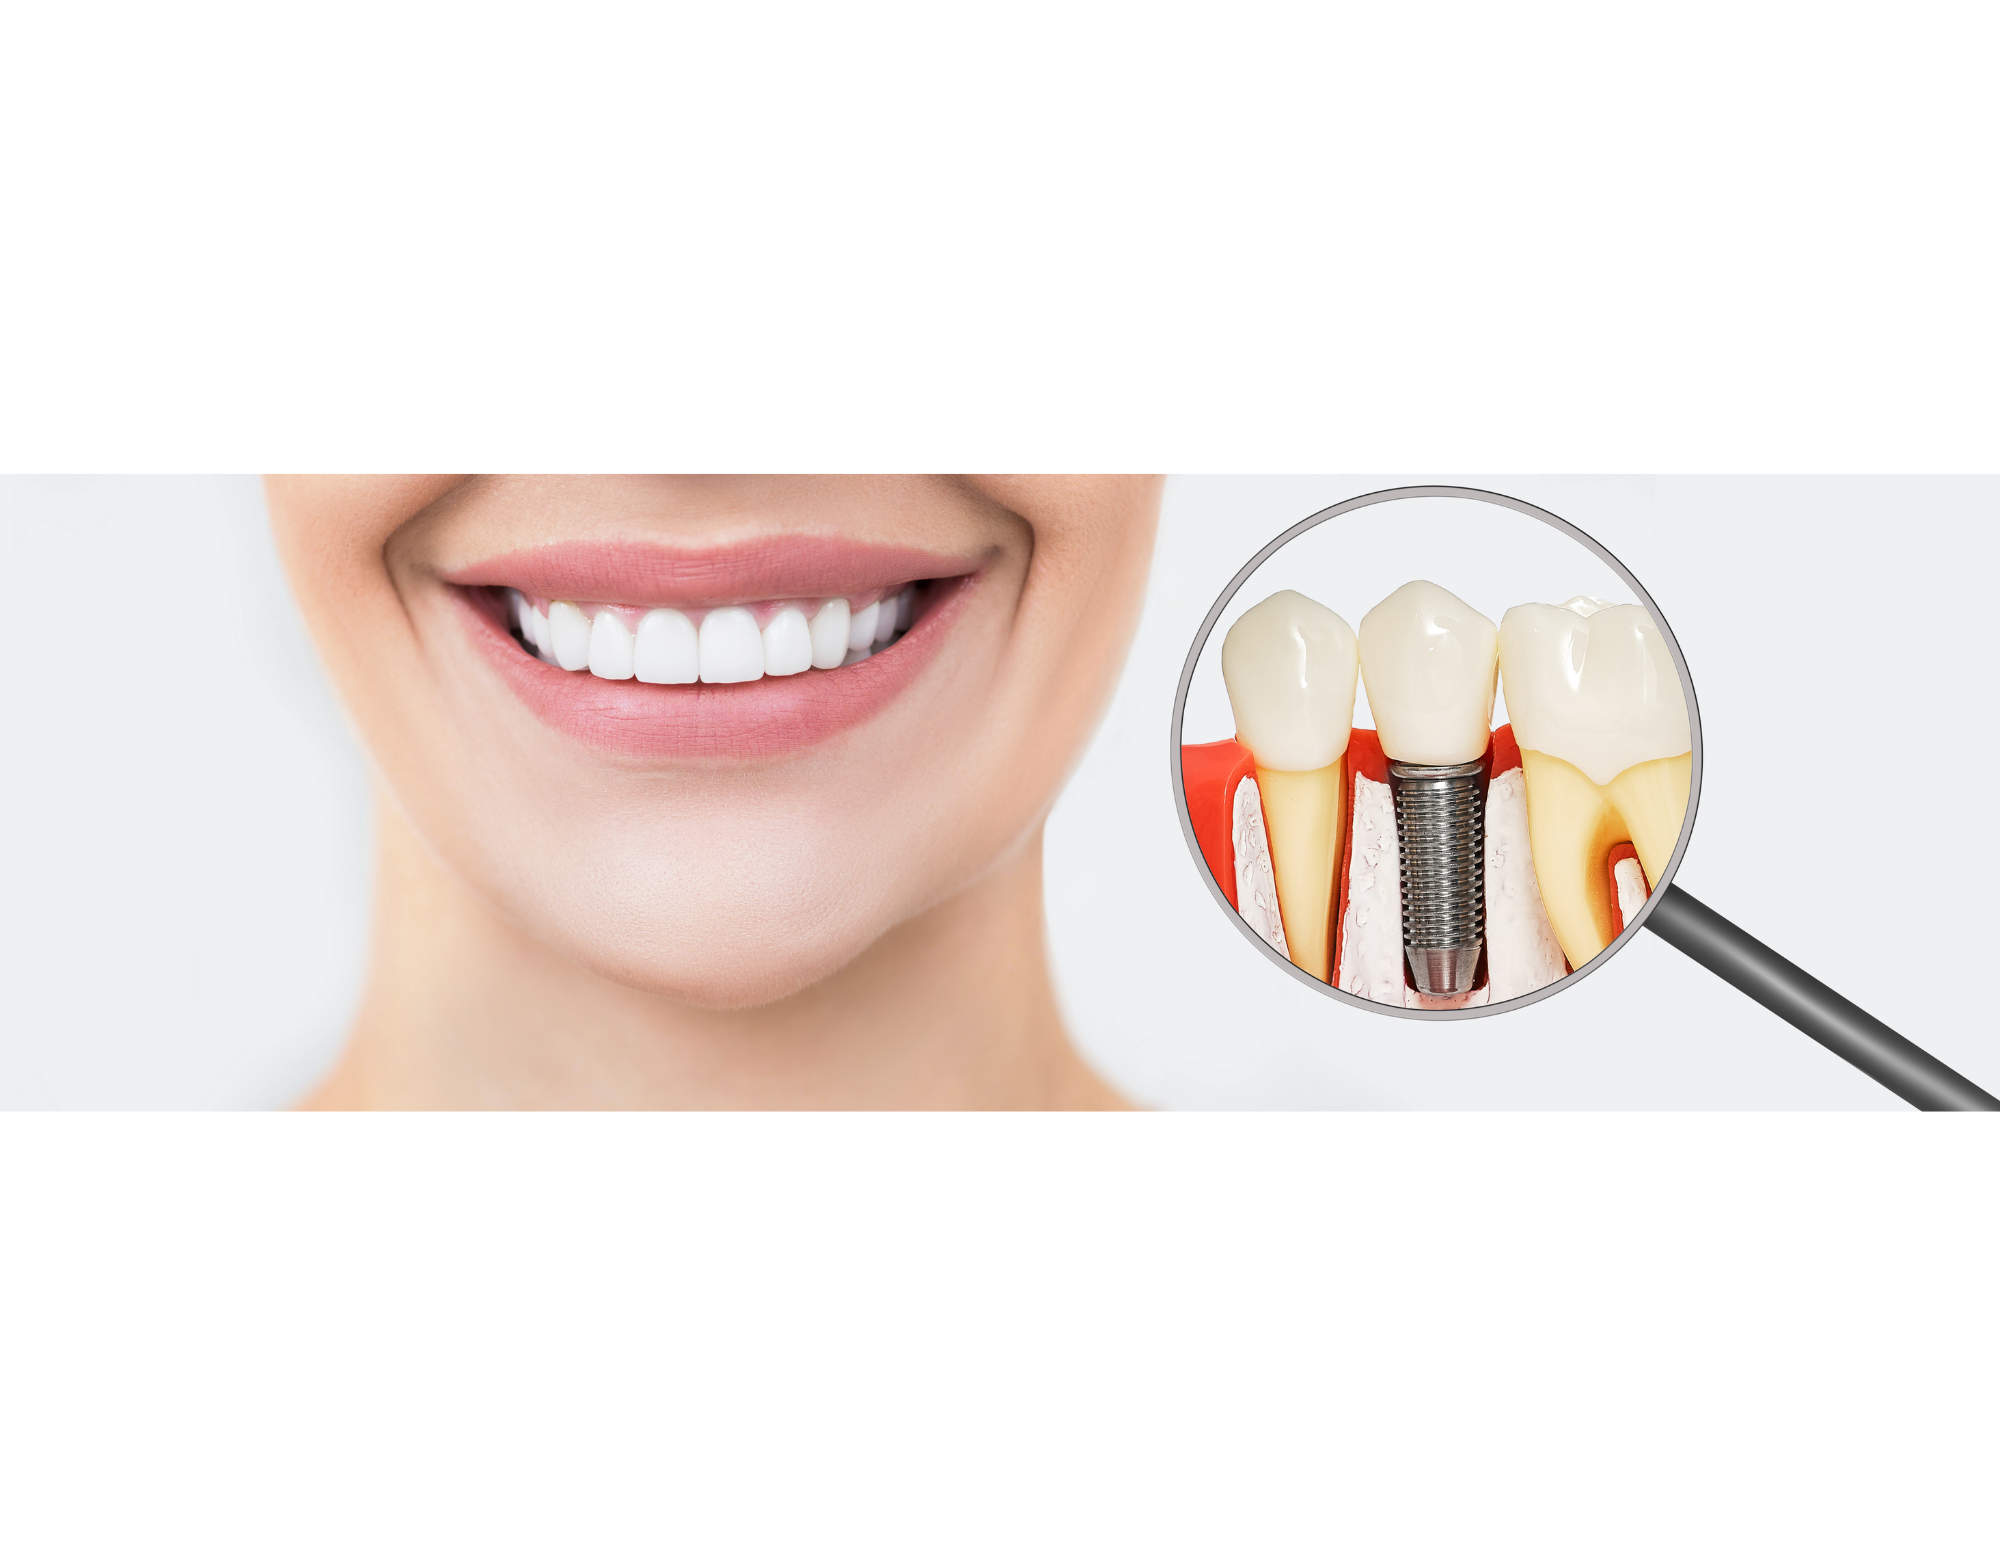 Healing After Dental Implant Surgery Image